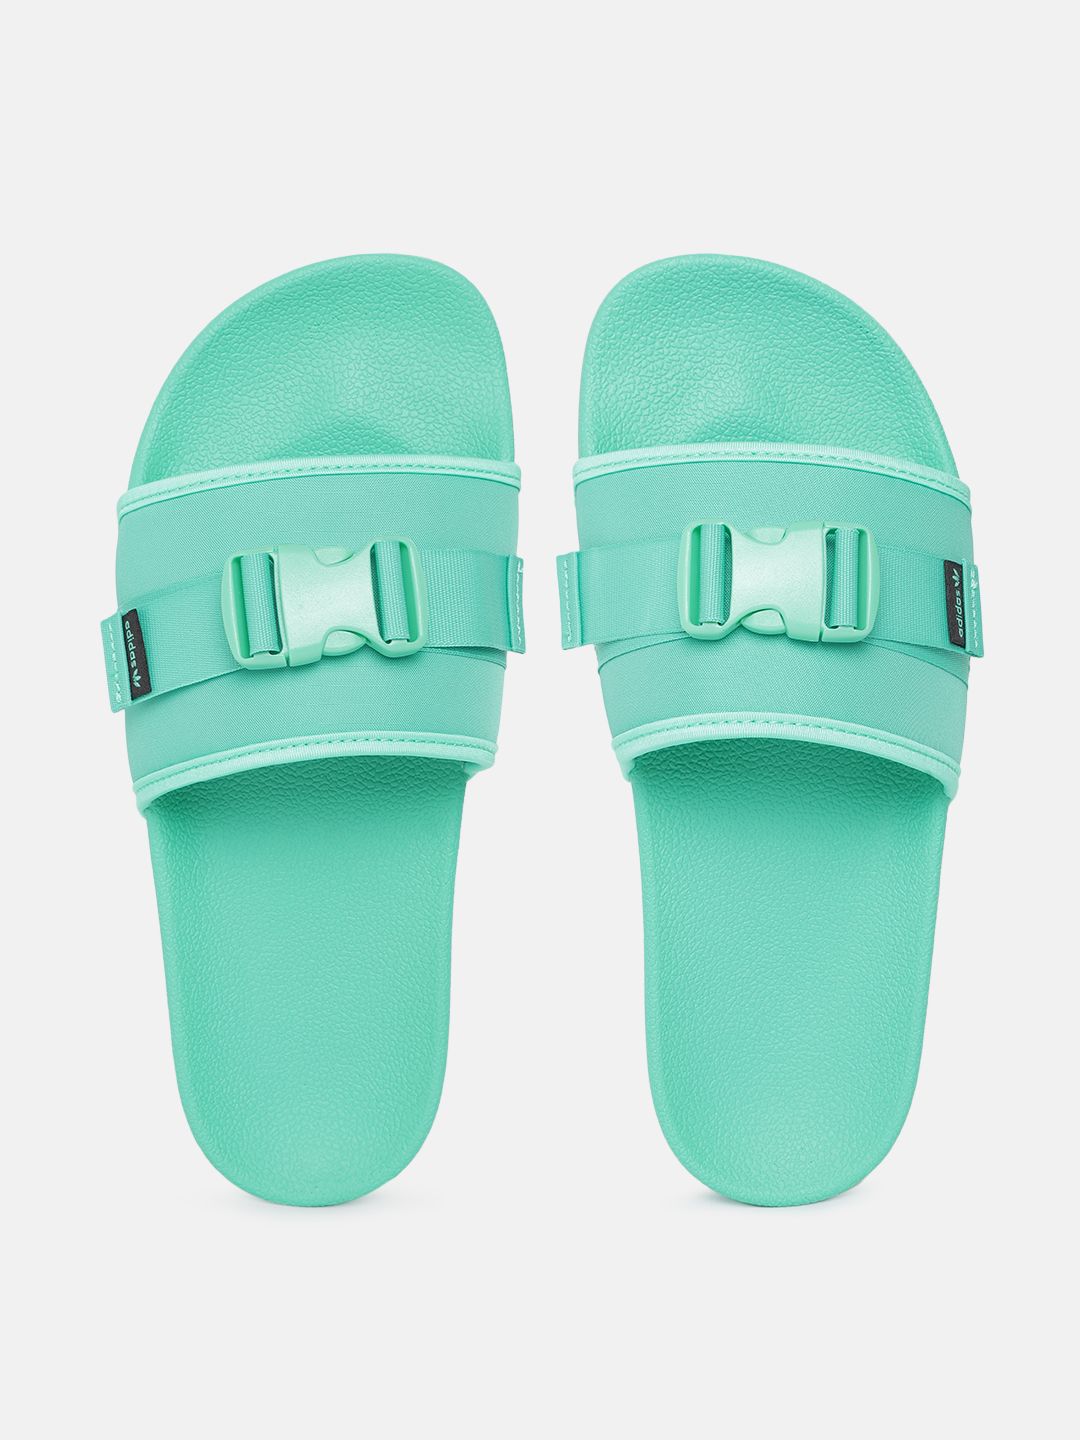 ADIDAS Originals Women Sea Green POUCHYLETTE Sustainable Sliders with Buckle Detail Price in India